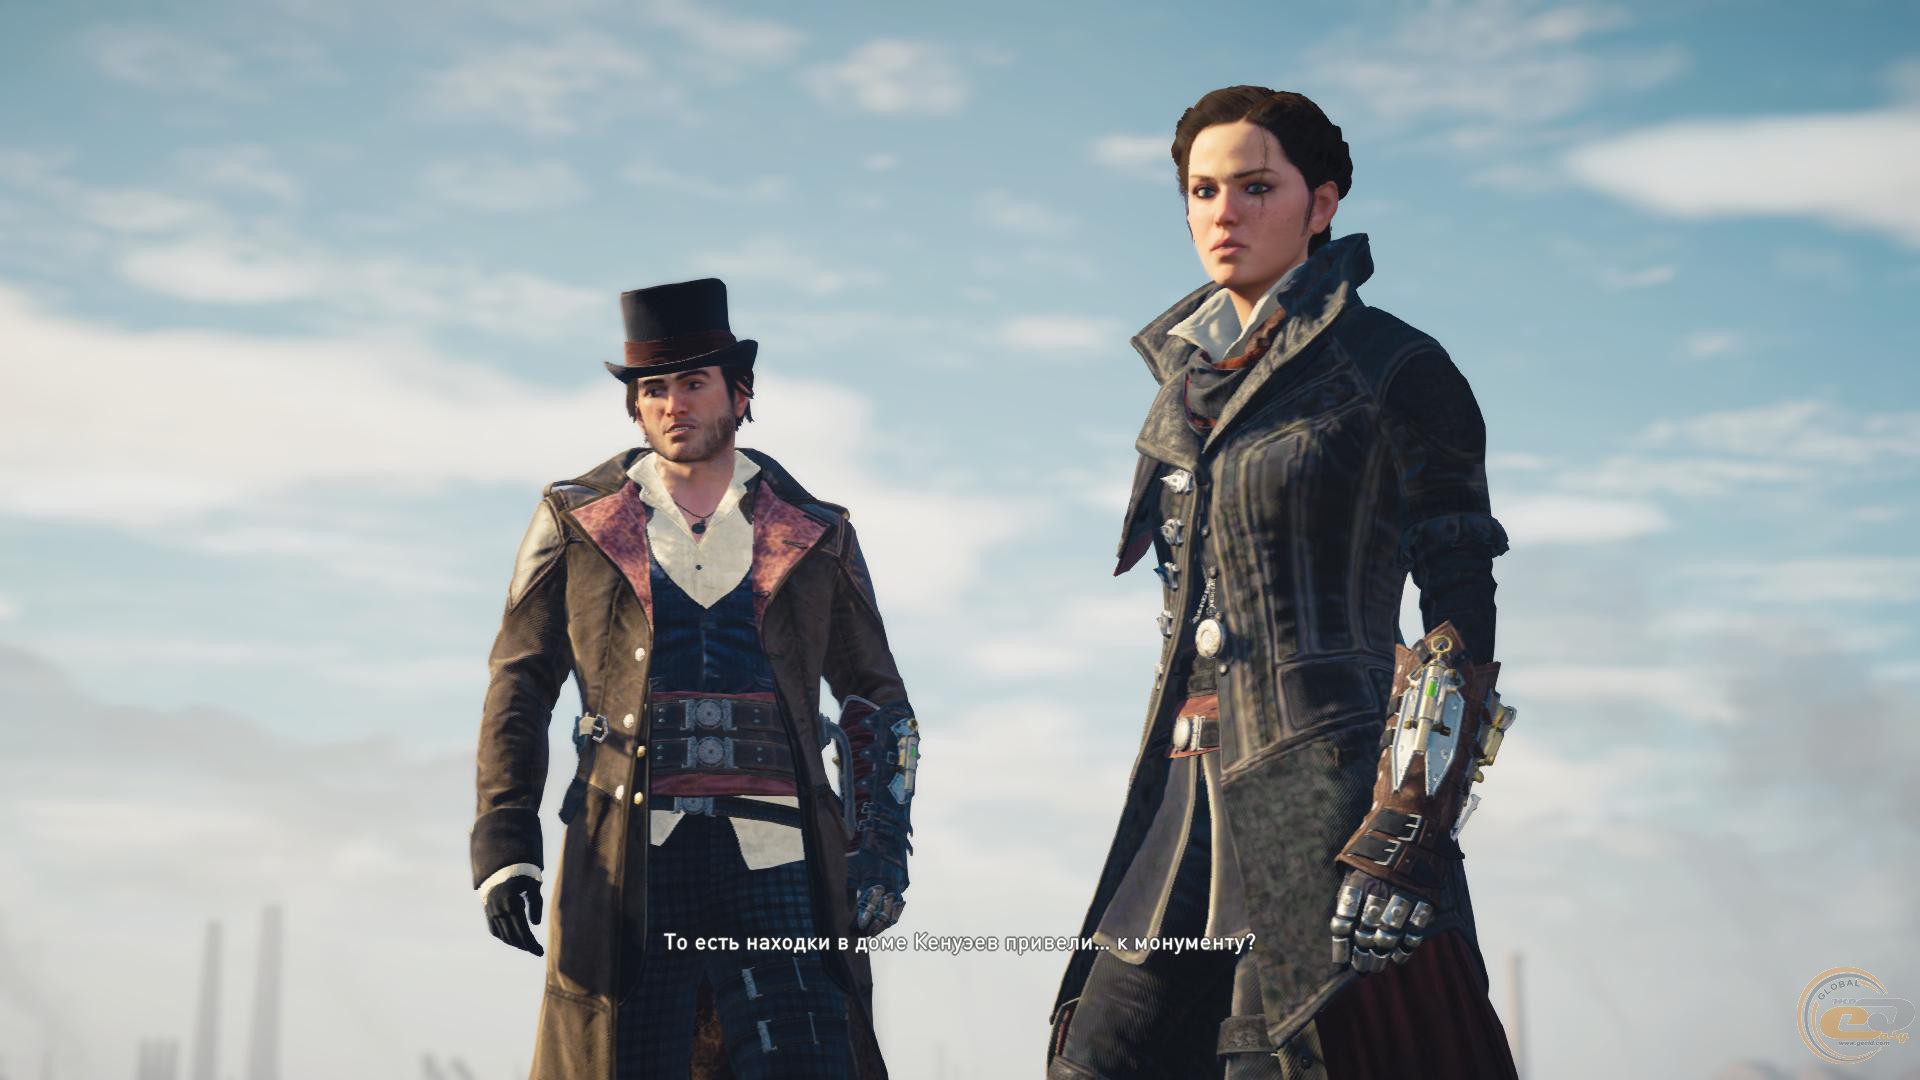 Assassins Creed Syndicate.